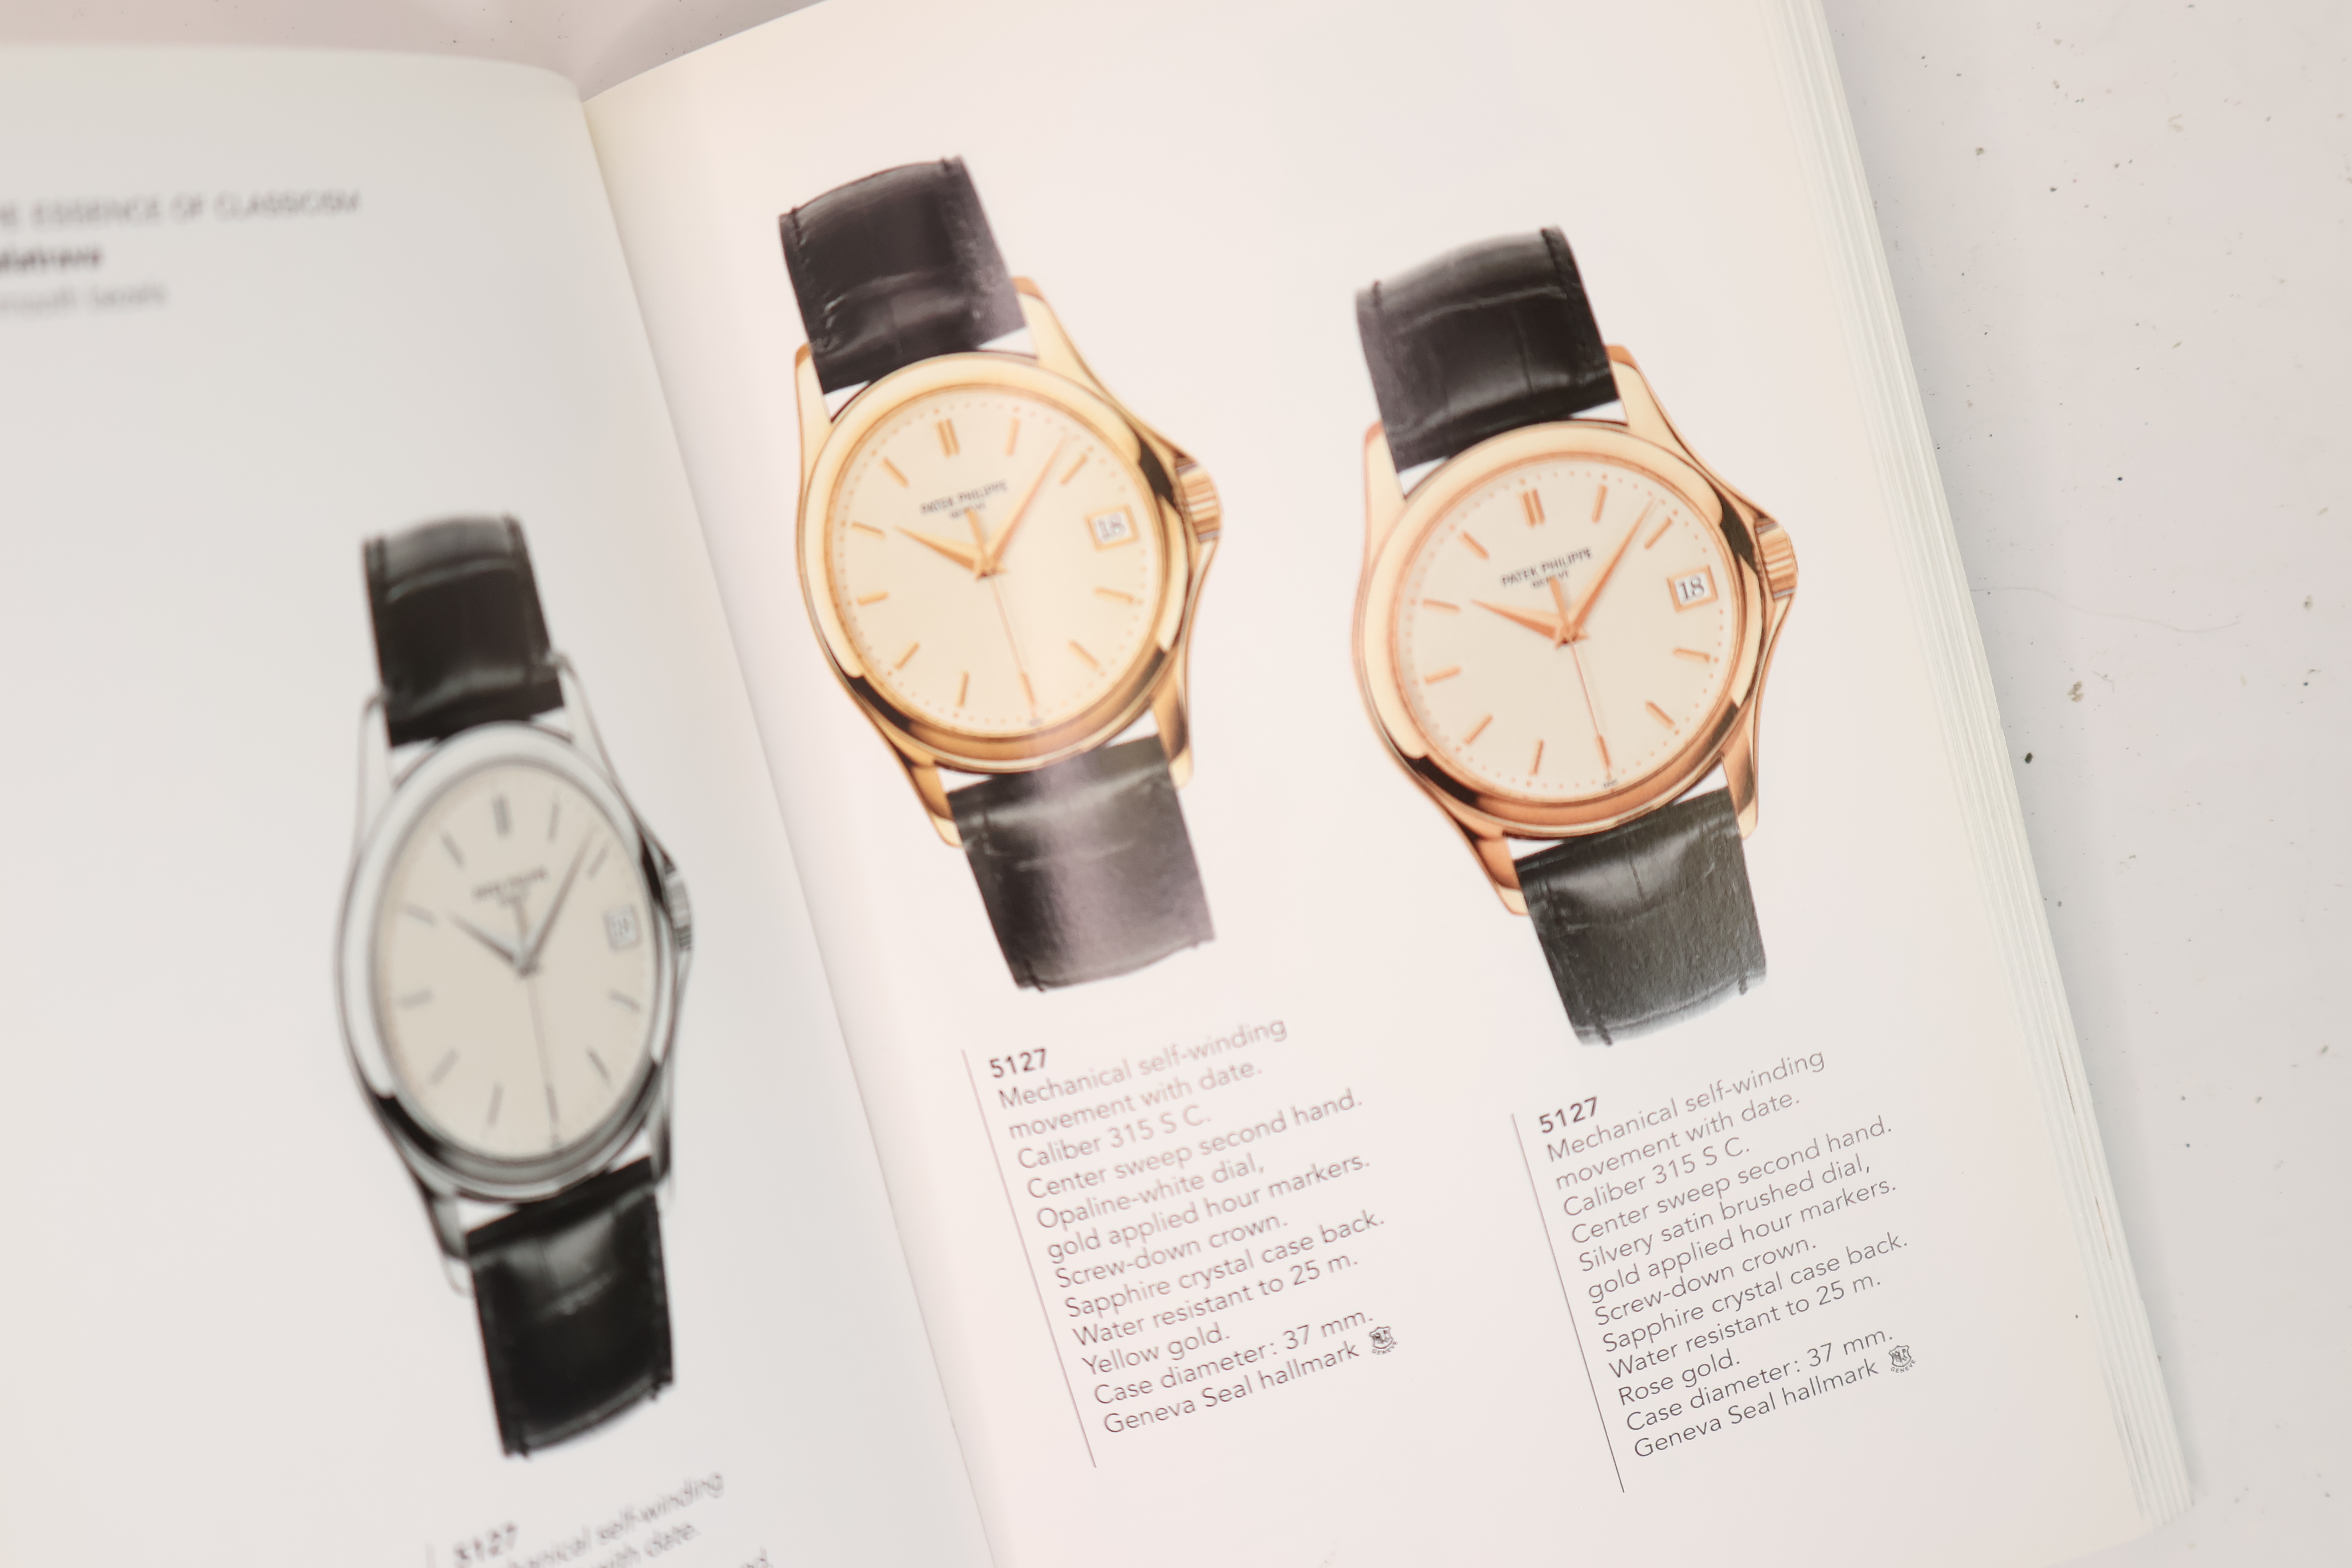 *To Be Sold Without Reserve* Patek Philippe collection highlights booklet 2005/2006 - Image 3 of 3